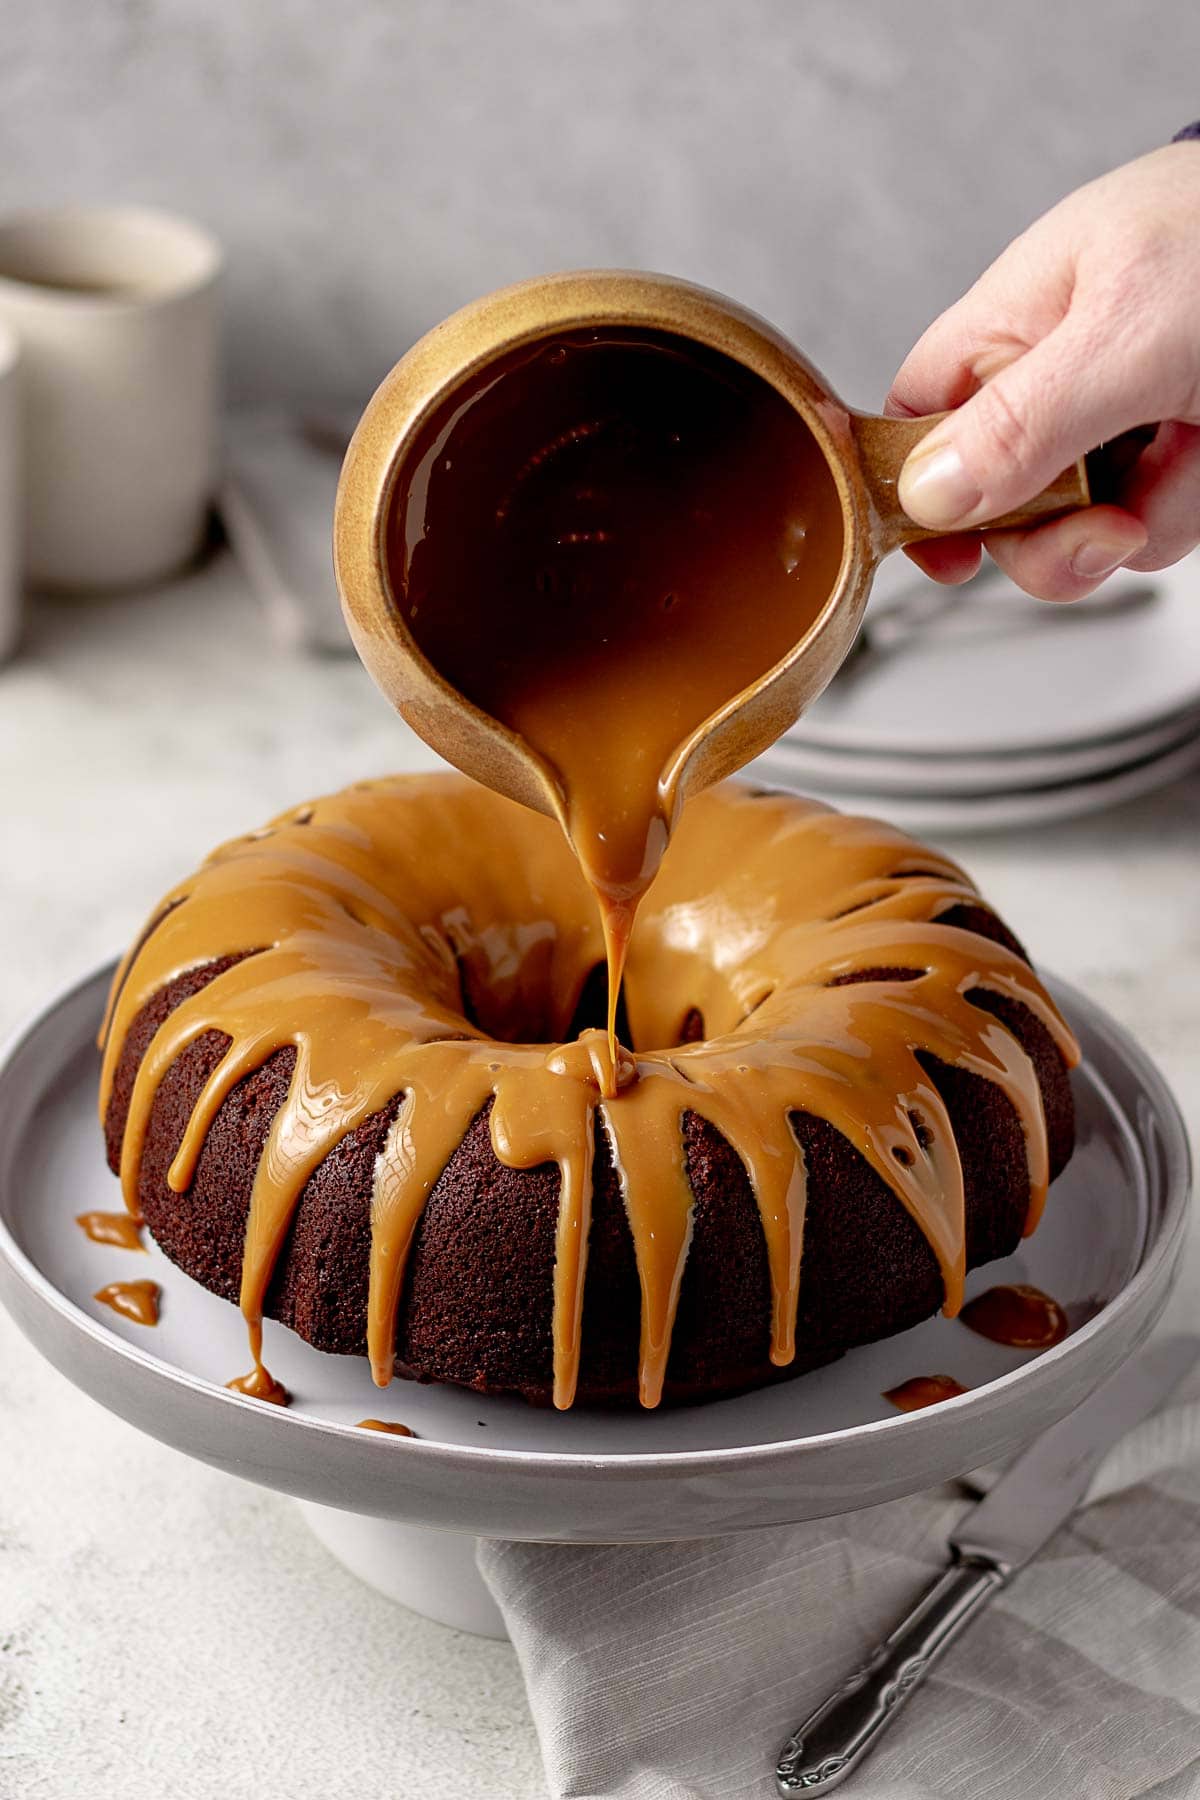 Chocolate Bundt Cake Topped with Caramel Treat or dulce de leche.